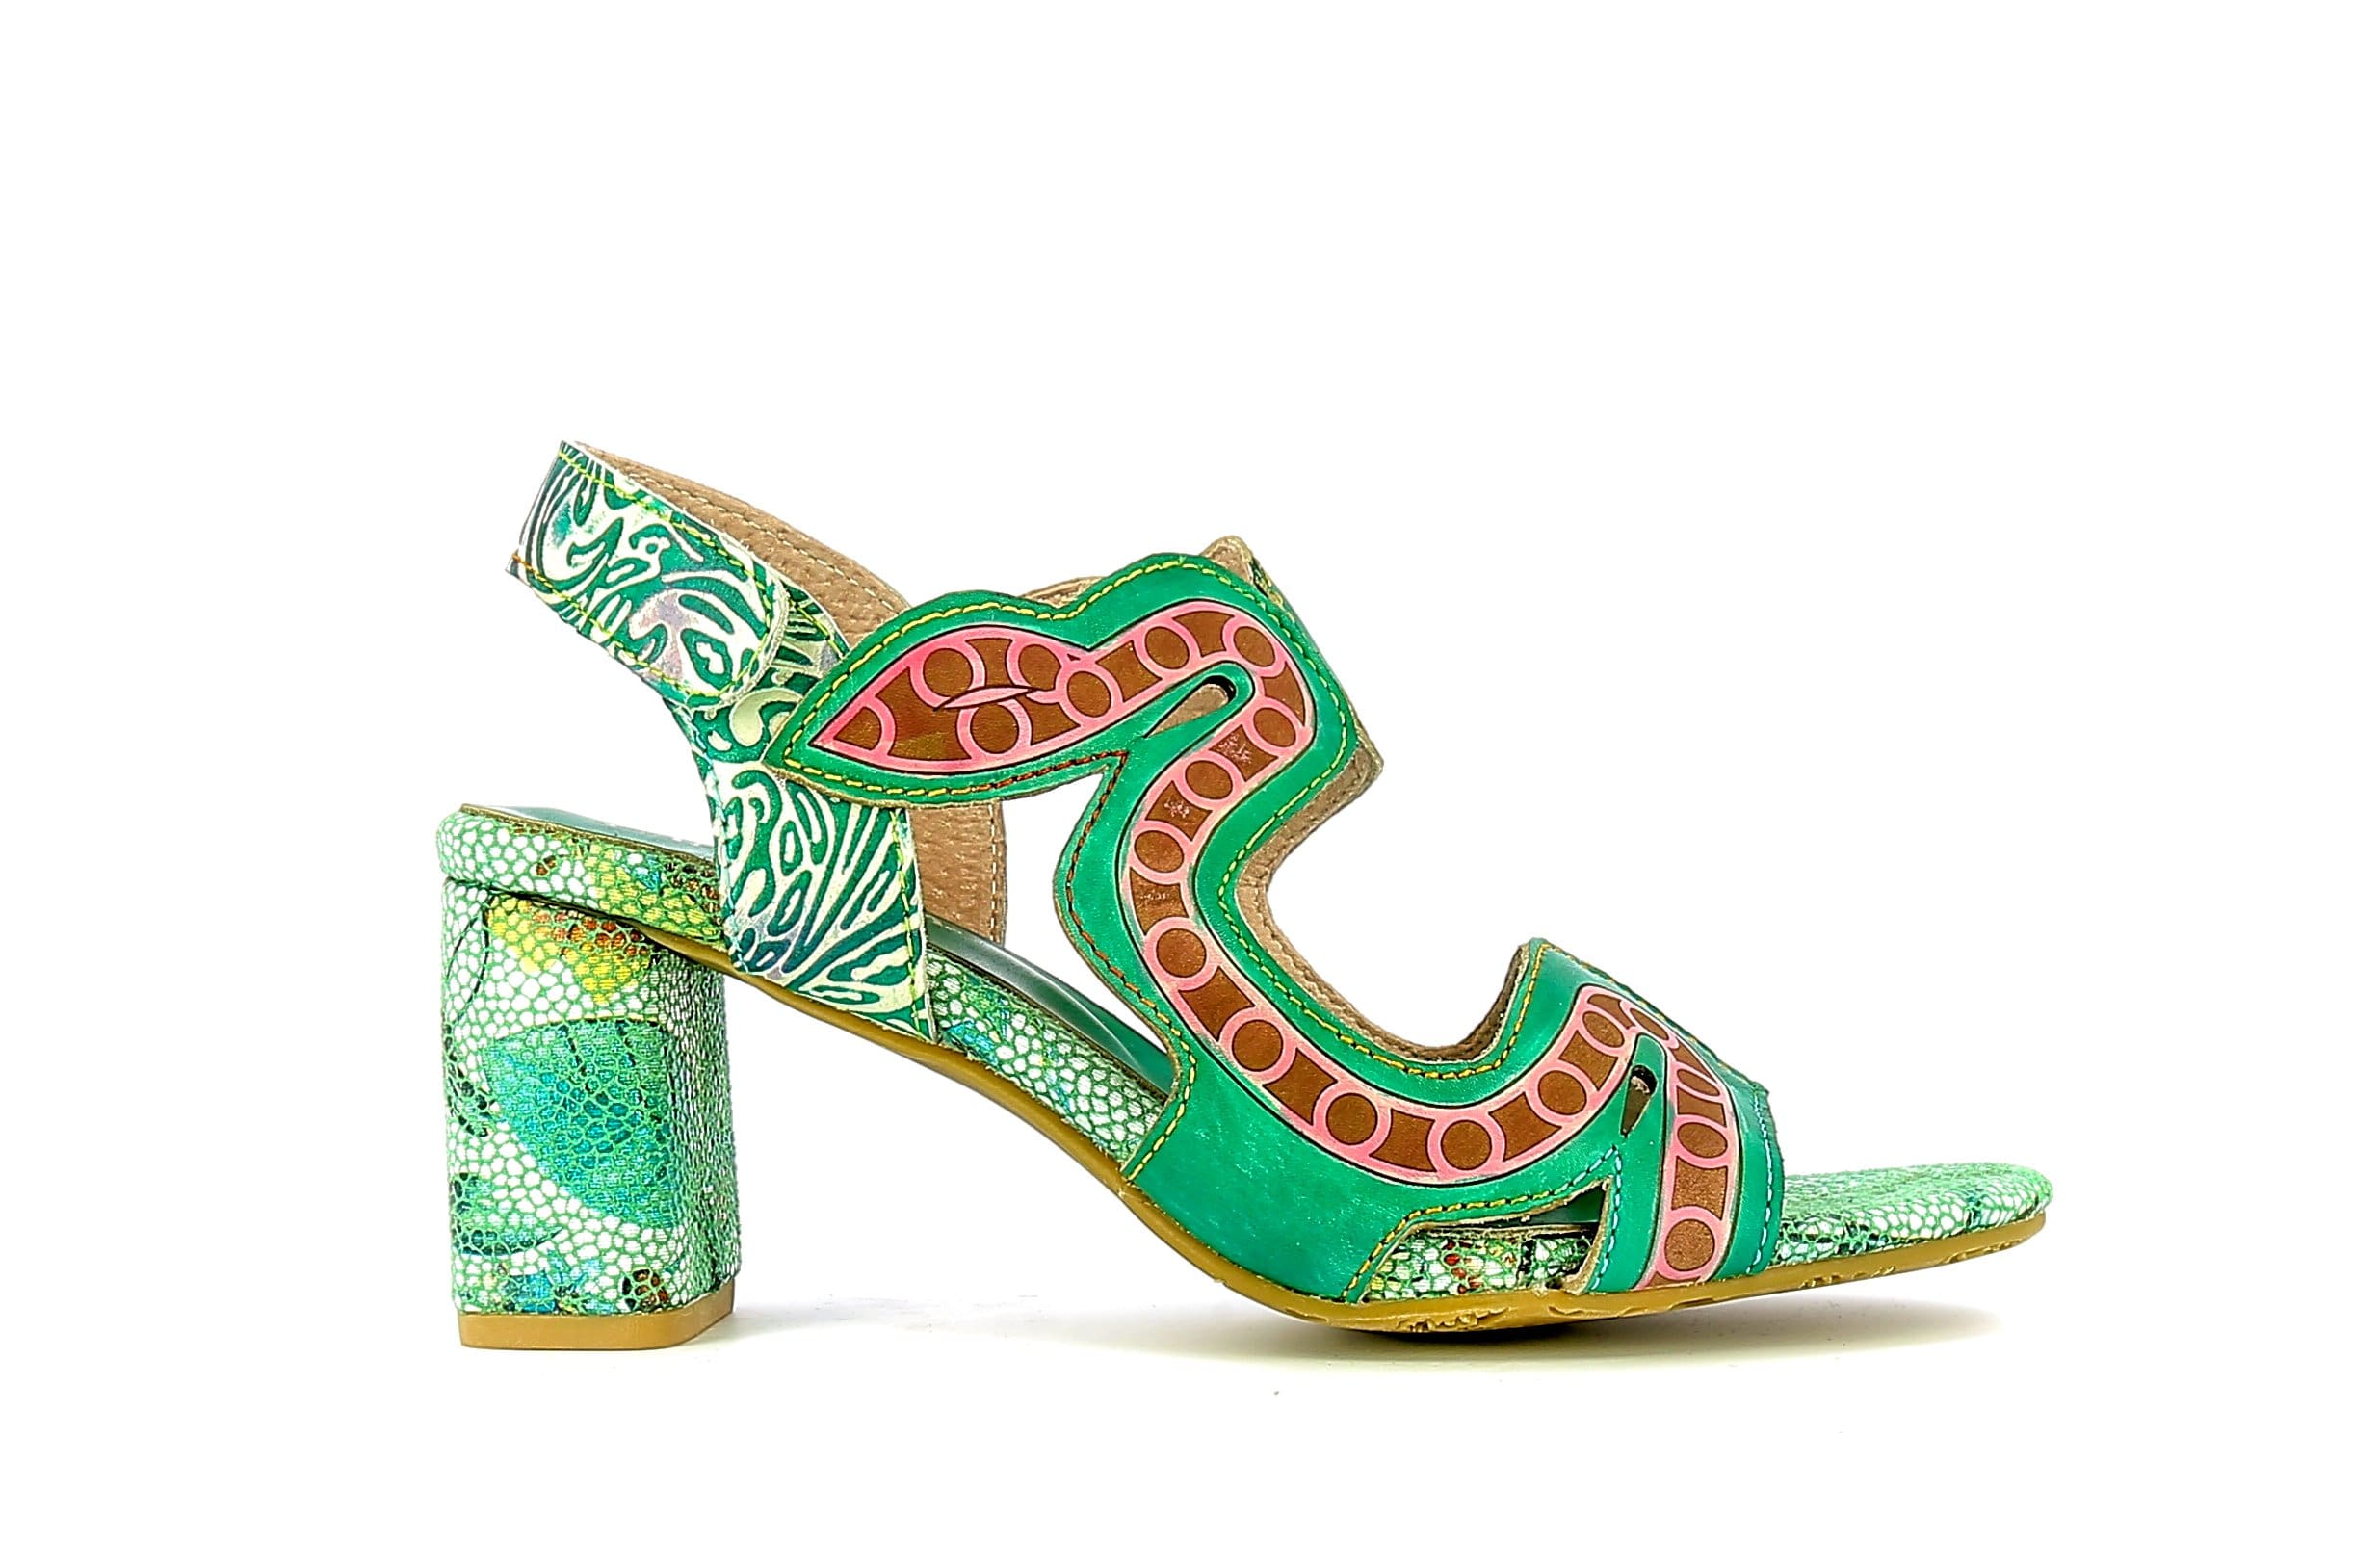 HECO 01 shoes - 35 / GREEN - Sandal